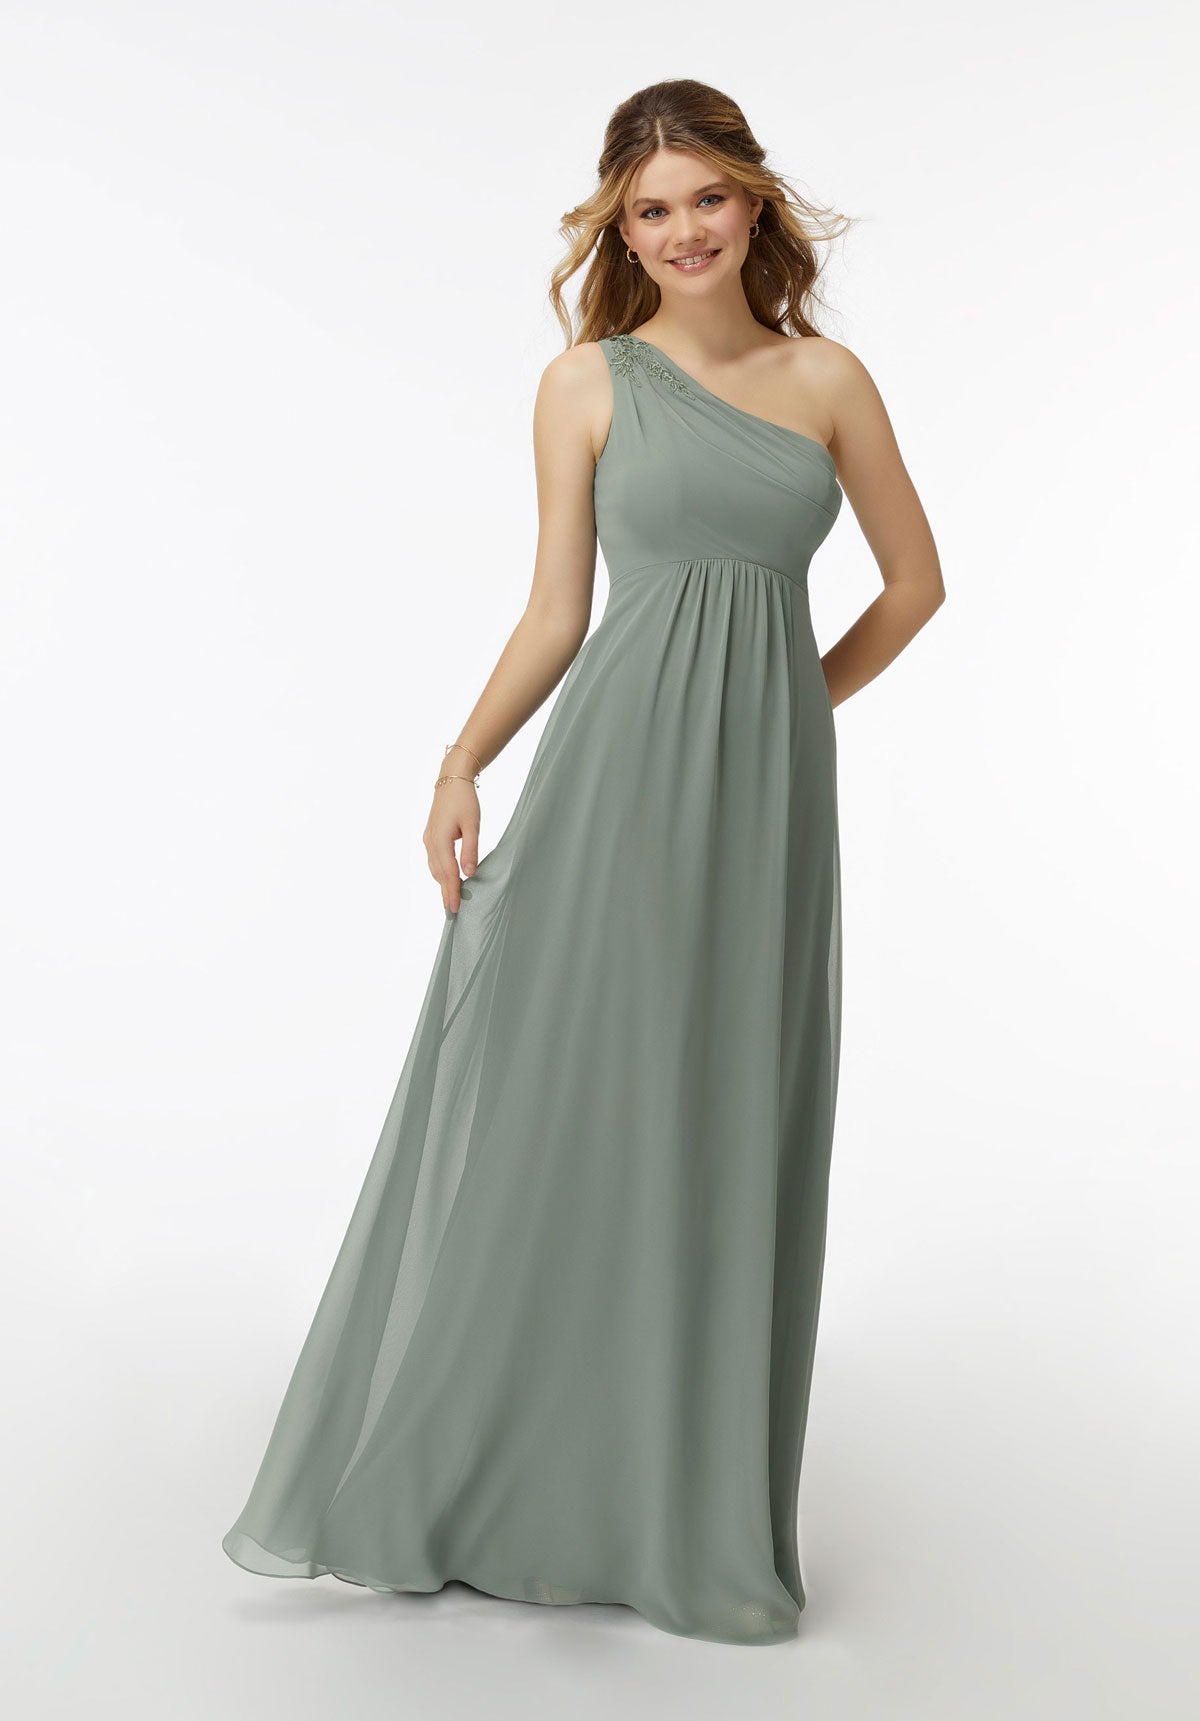 Morilee - 21738 - Cheron's Bridal, Bridesmaids Dress - Morilee - - Wedding Gowns Dresses Chattanooga Hixson Shops Boutiques Tennessee TN Georgia GA MSRP Lowest Prices Sale Discount